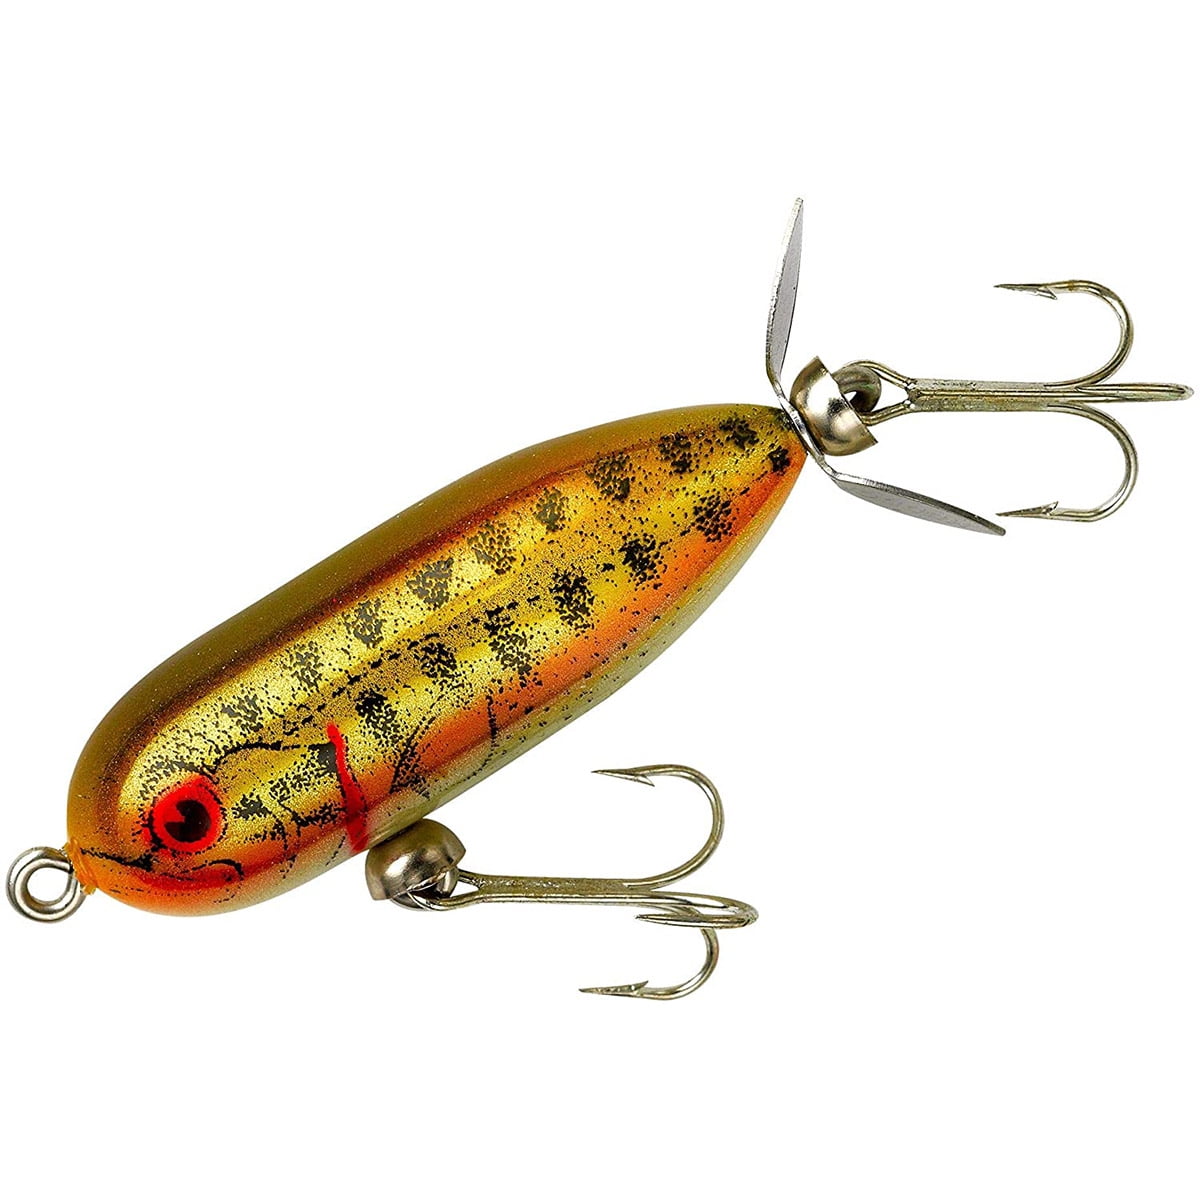 Angmile Spider Fishing Lures Weedless Fishing Lure 3.15 inch Bionic Spider  Swimming Lures for Freshwater Saltwater Lures Kit Lifelike